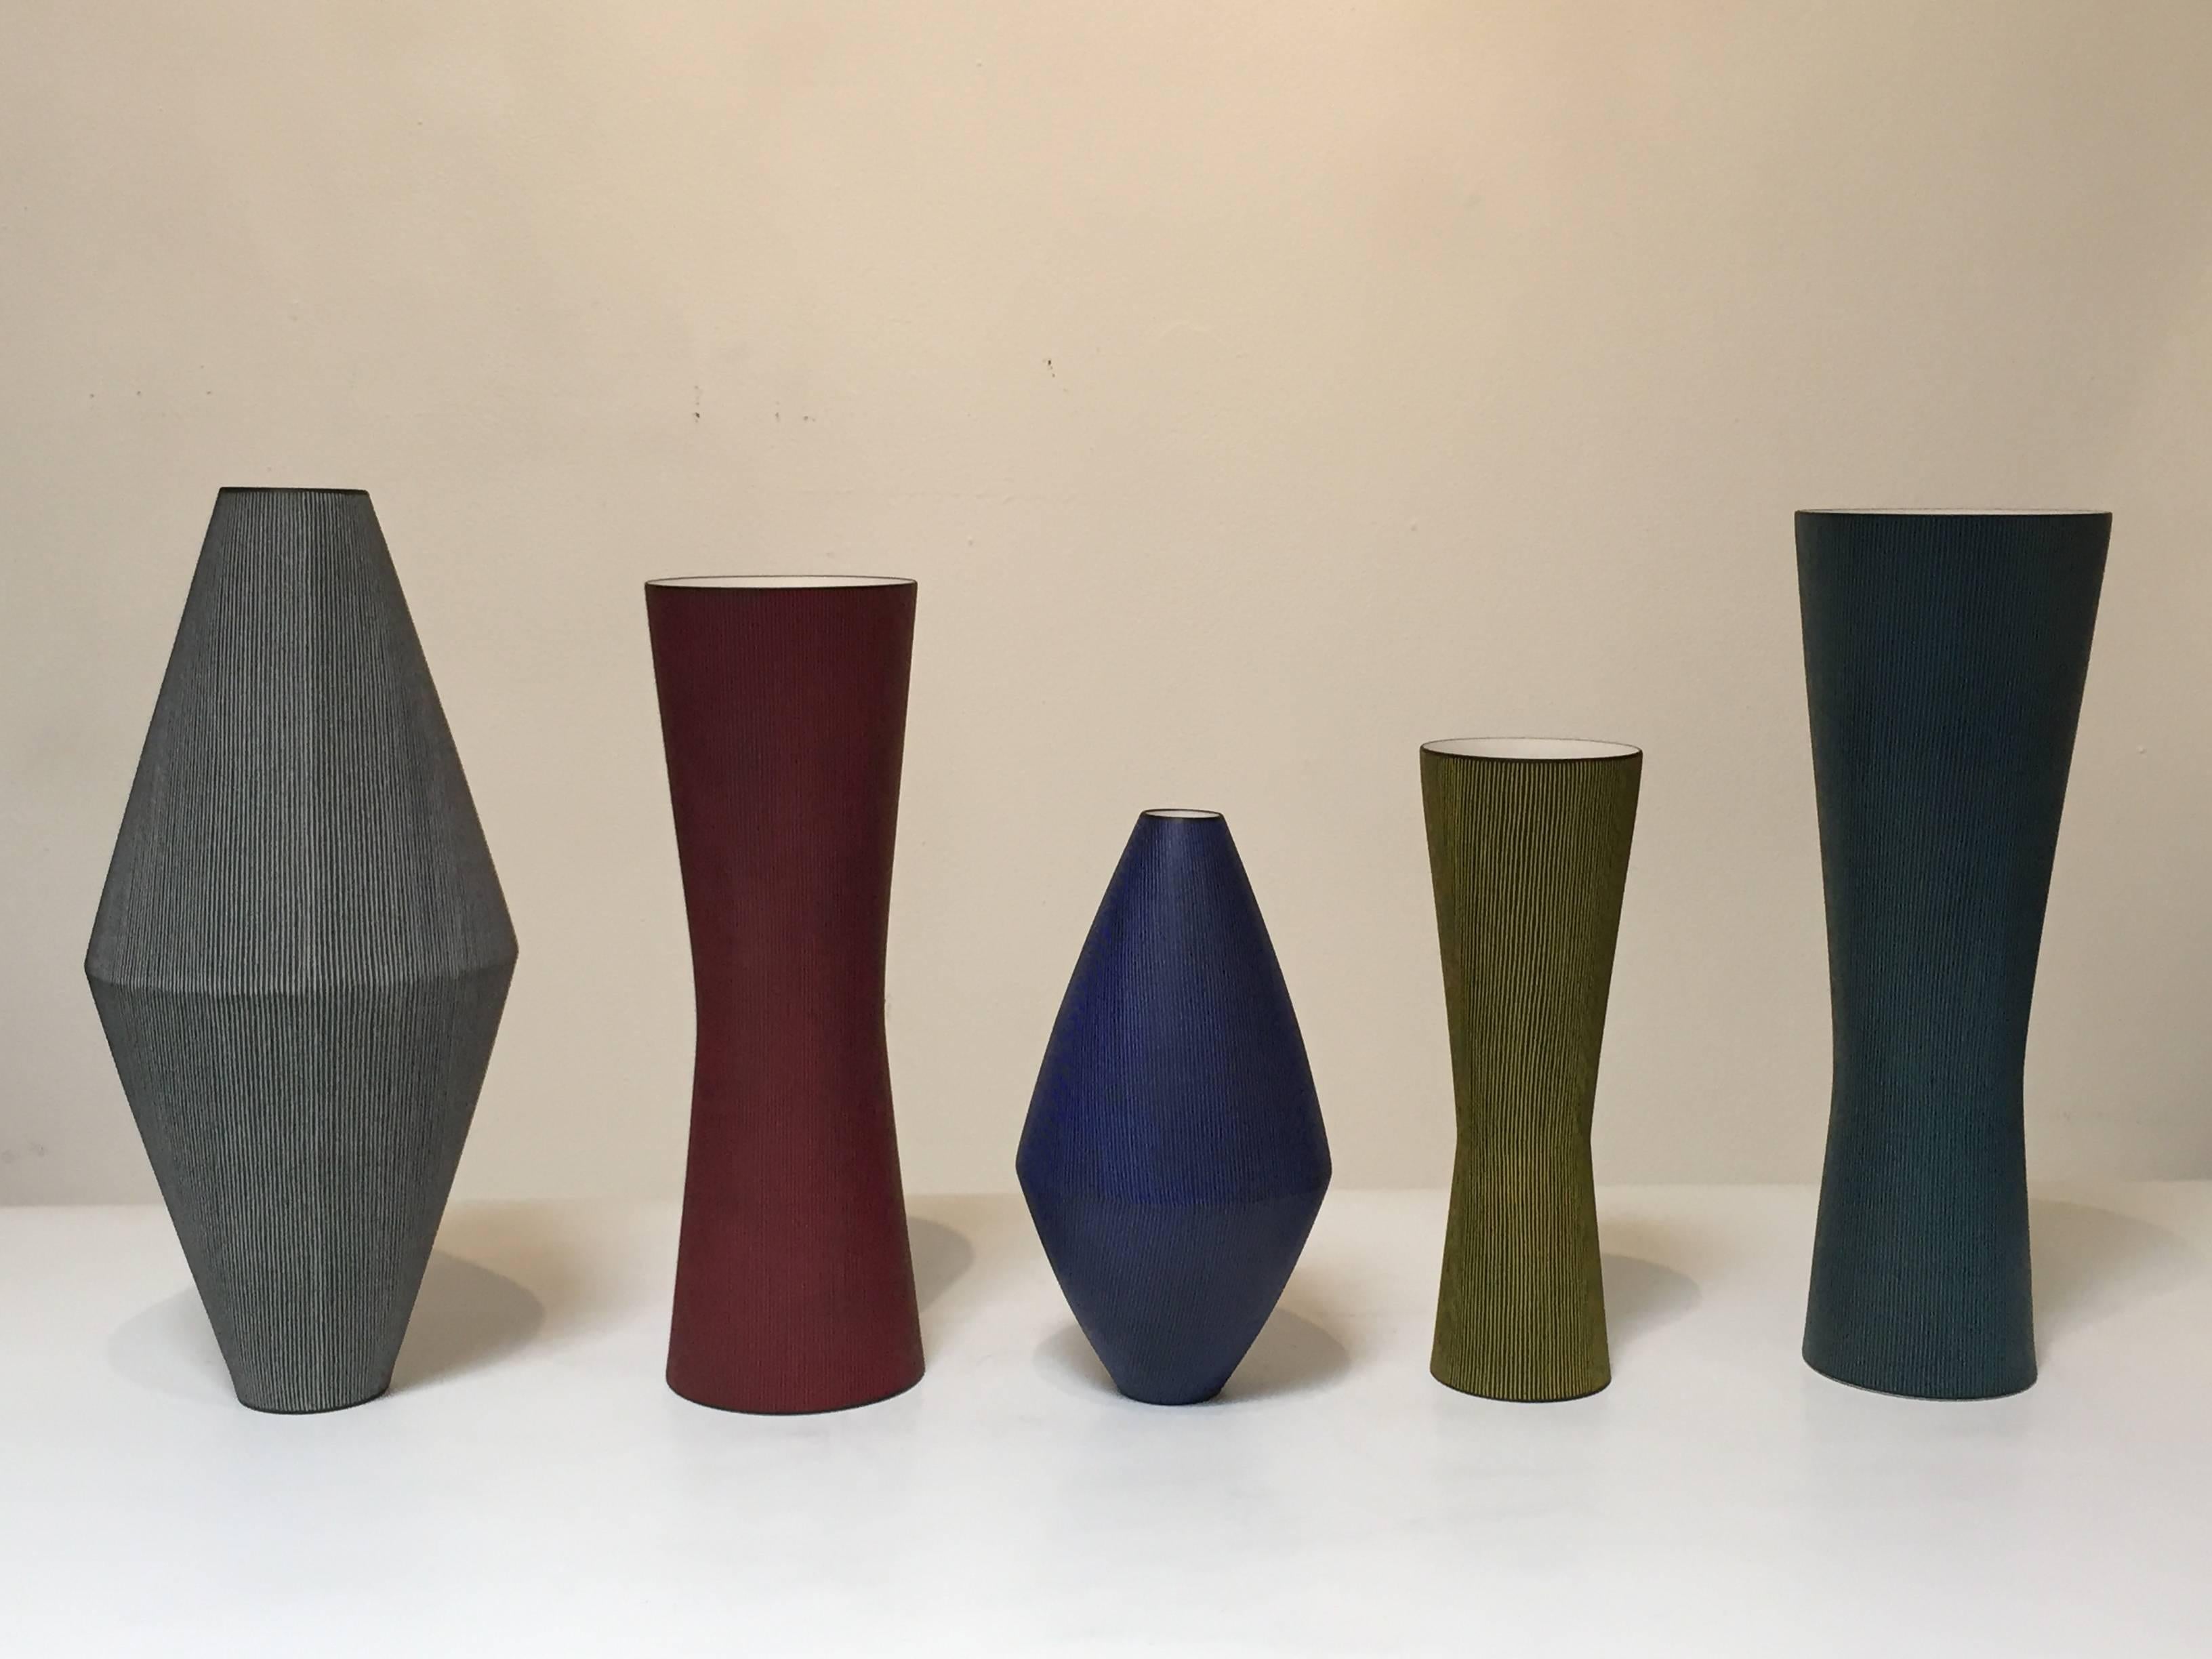 Group of Five Contemporary Porcelain Vases by Japanese Artist Masaru Nakada 7